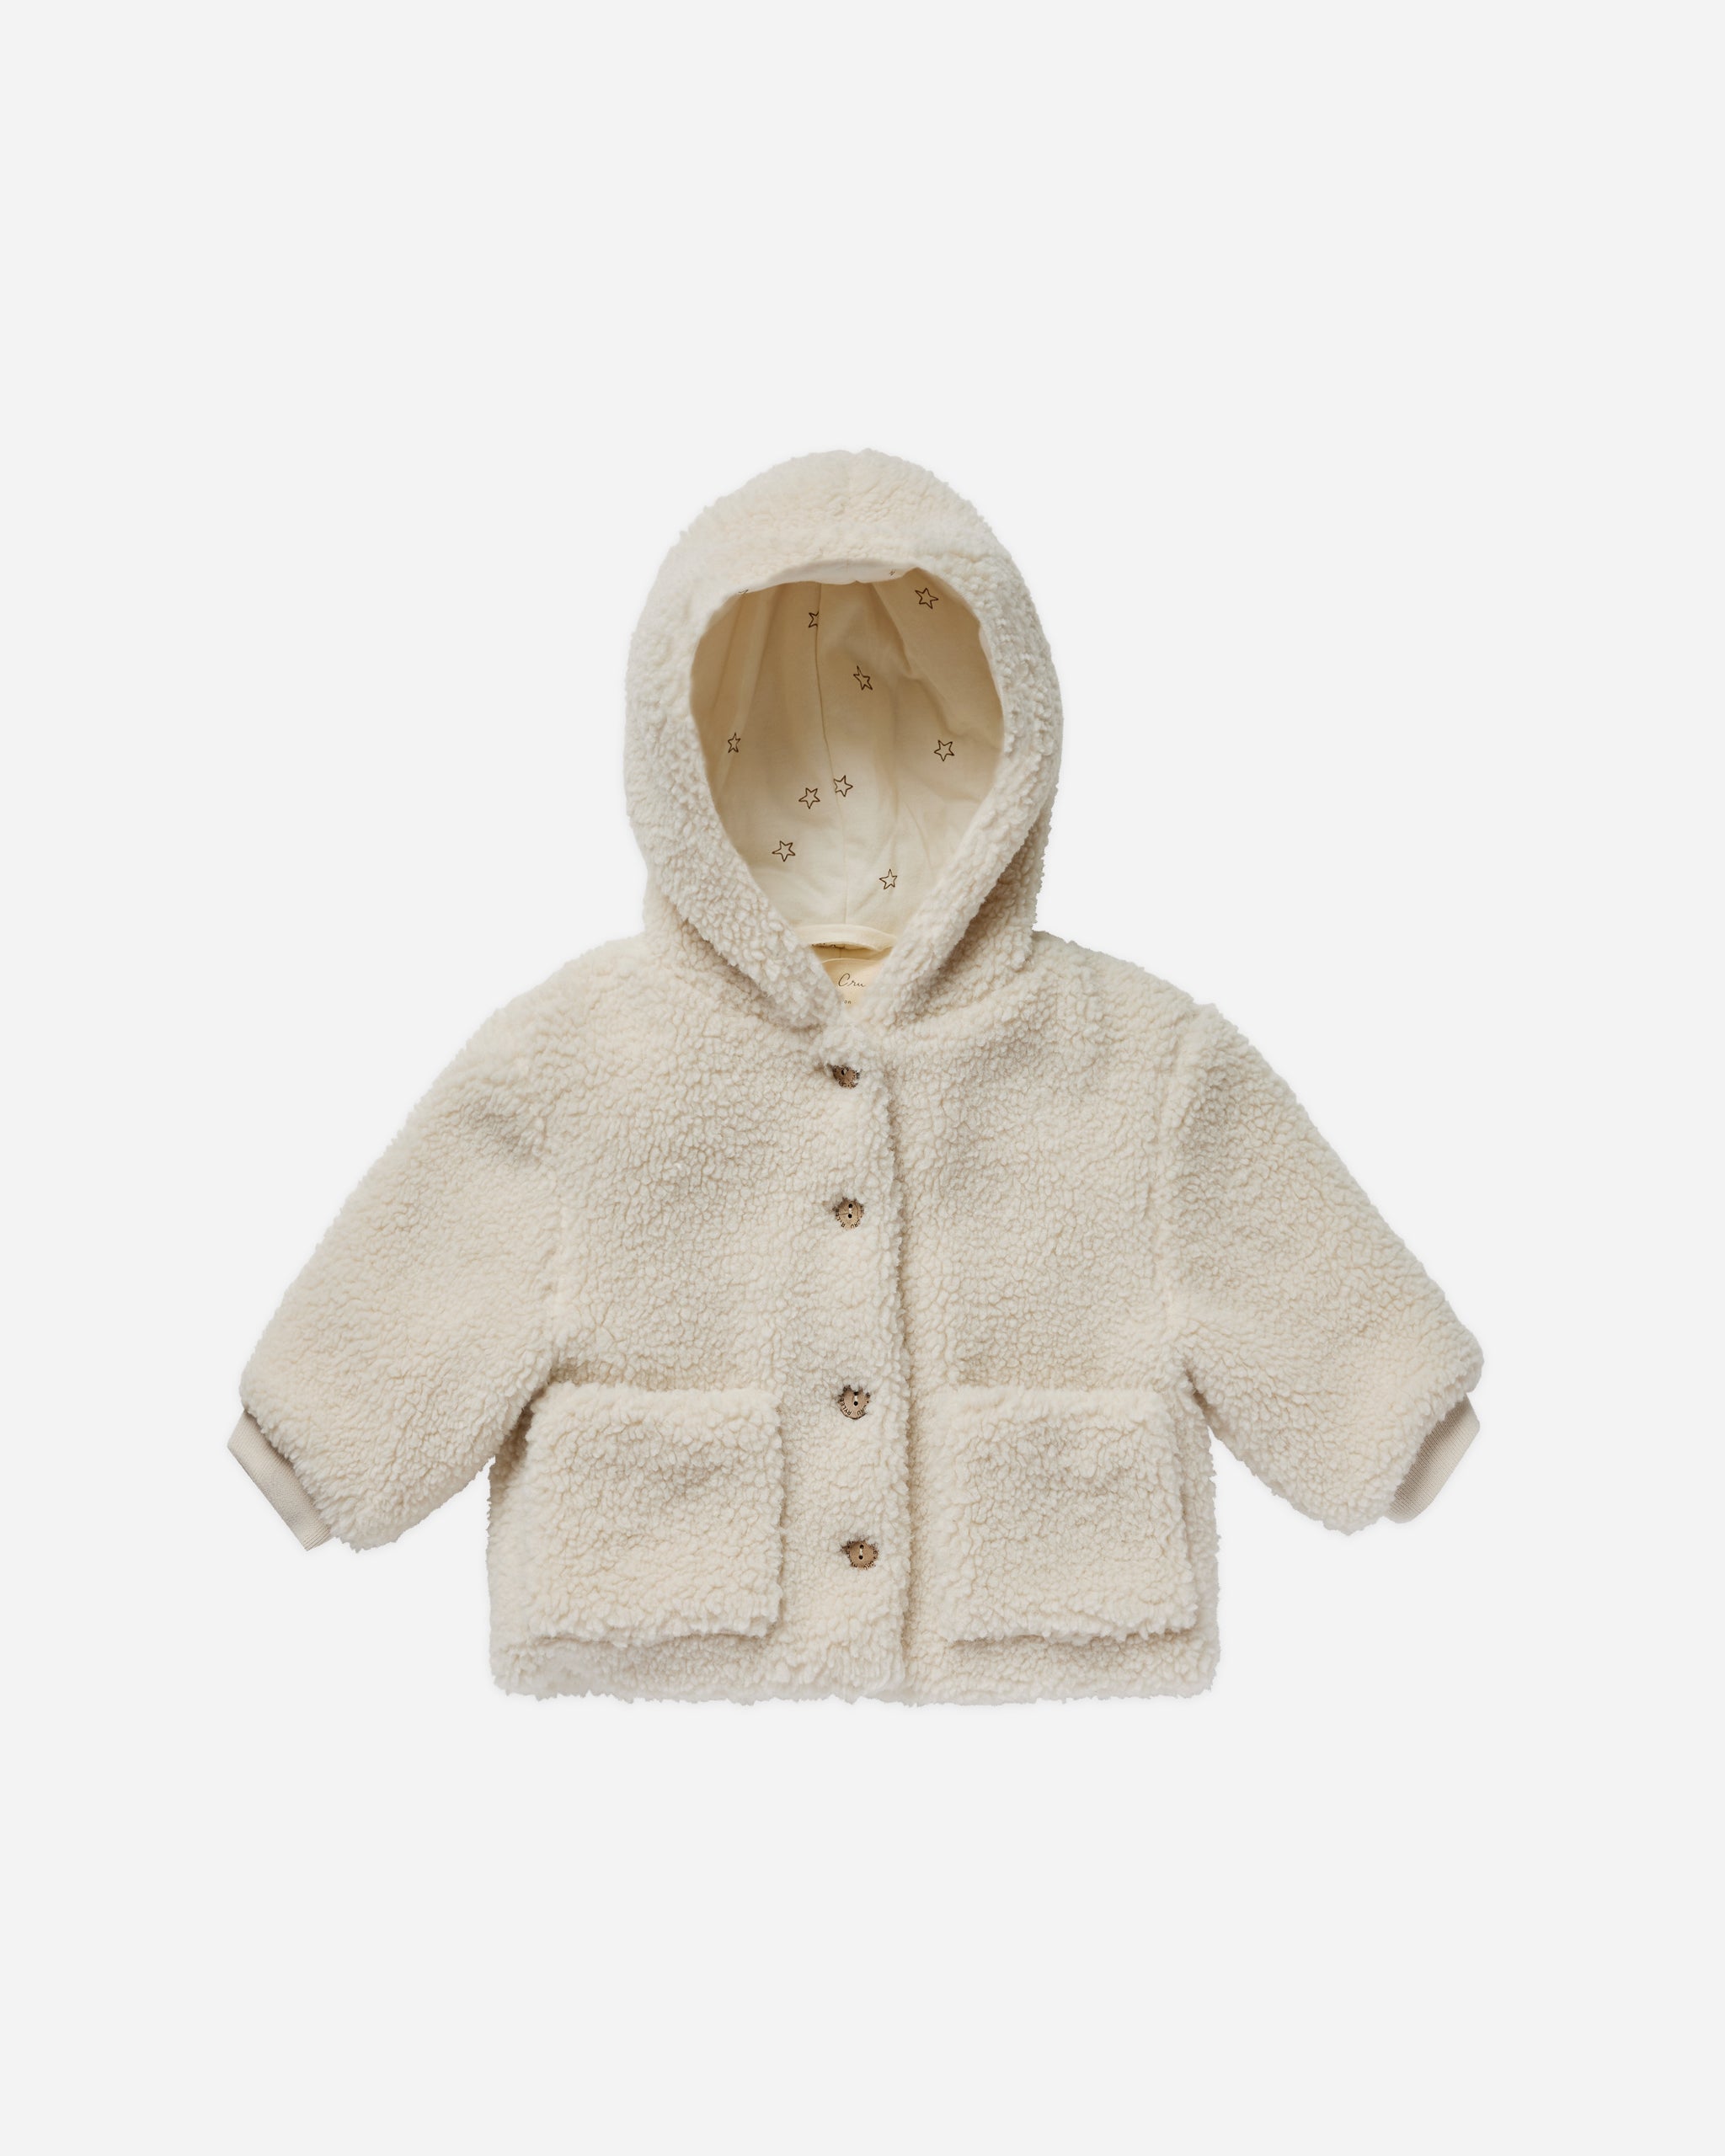 Shearling Baby Coat || Natural - Rylee + Cru | Kids Clothes | Trendy Baby Clothes | Modern Infant Outfits |